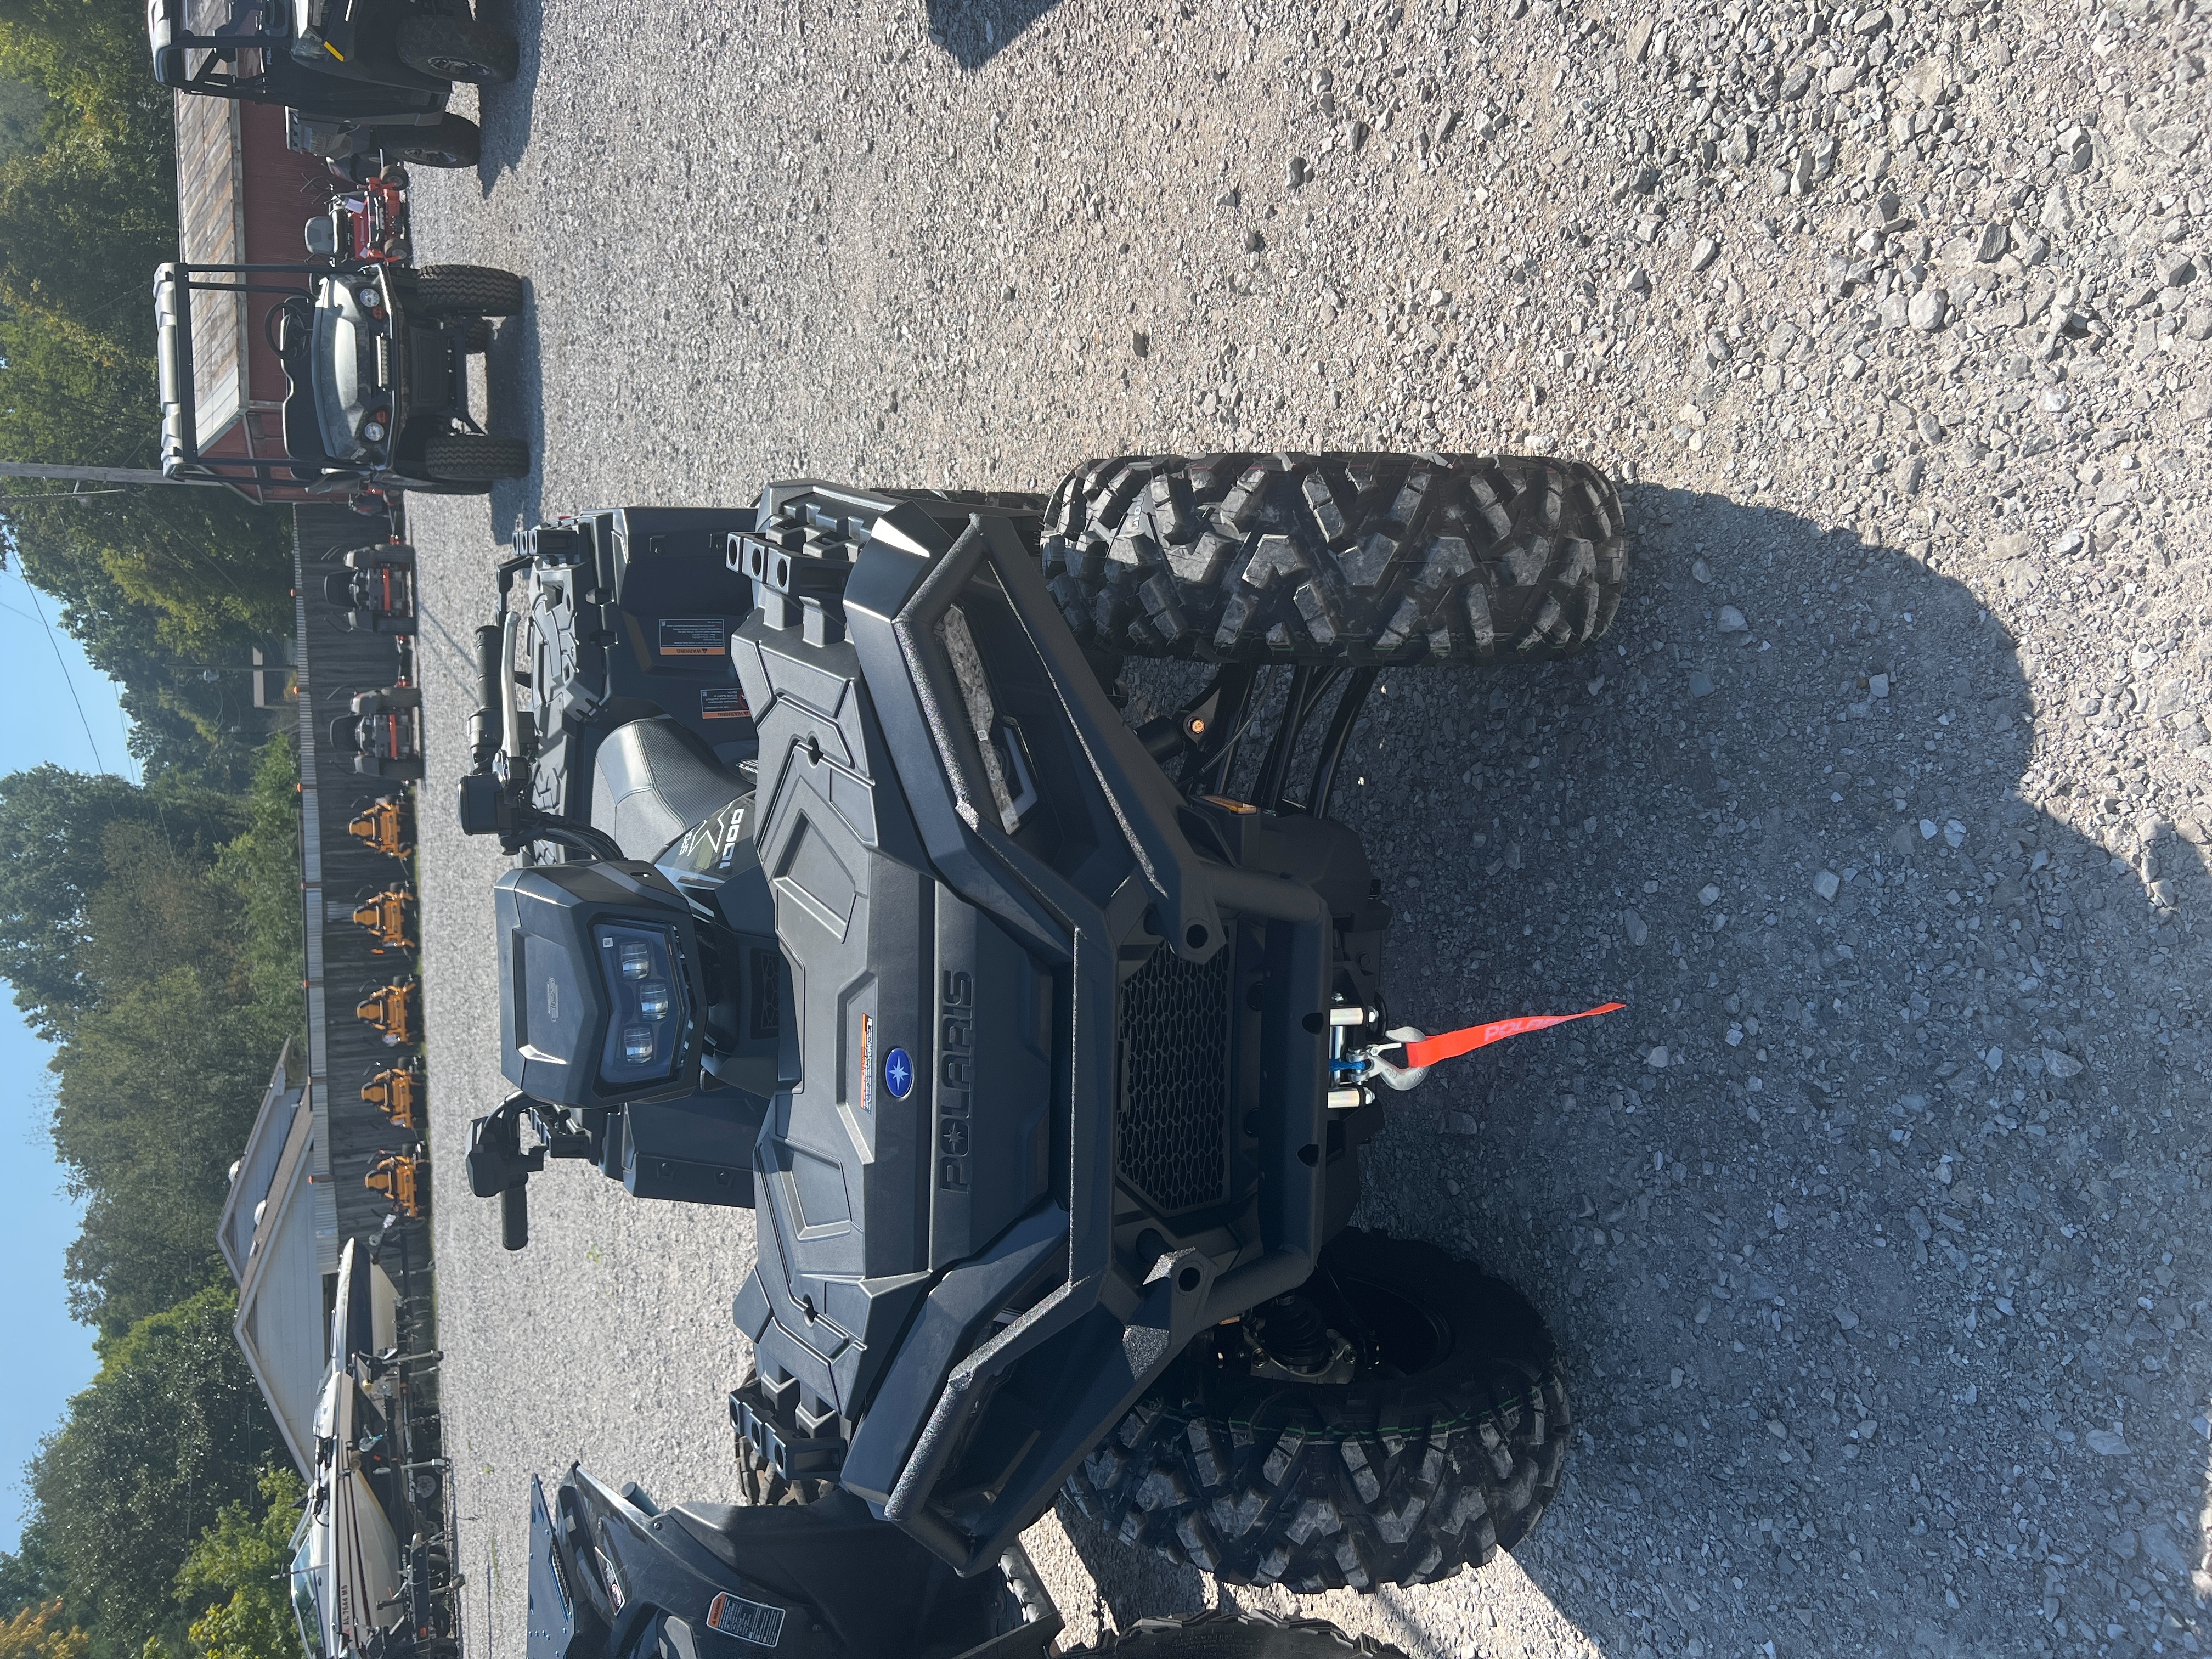 2022 Polaris Sportsman XP 1000 Ultimate Trail at Shoal's Outdoor Sports - Florence